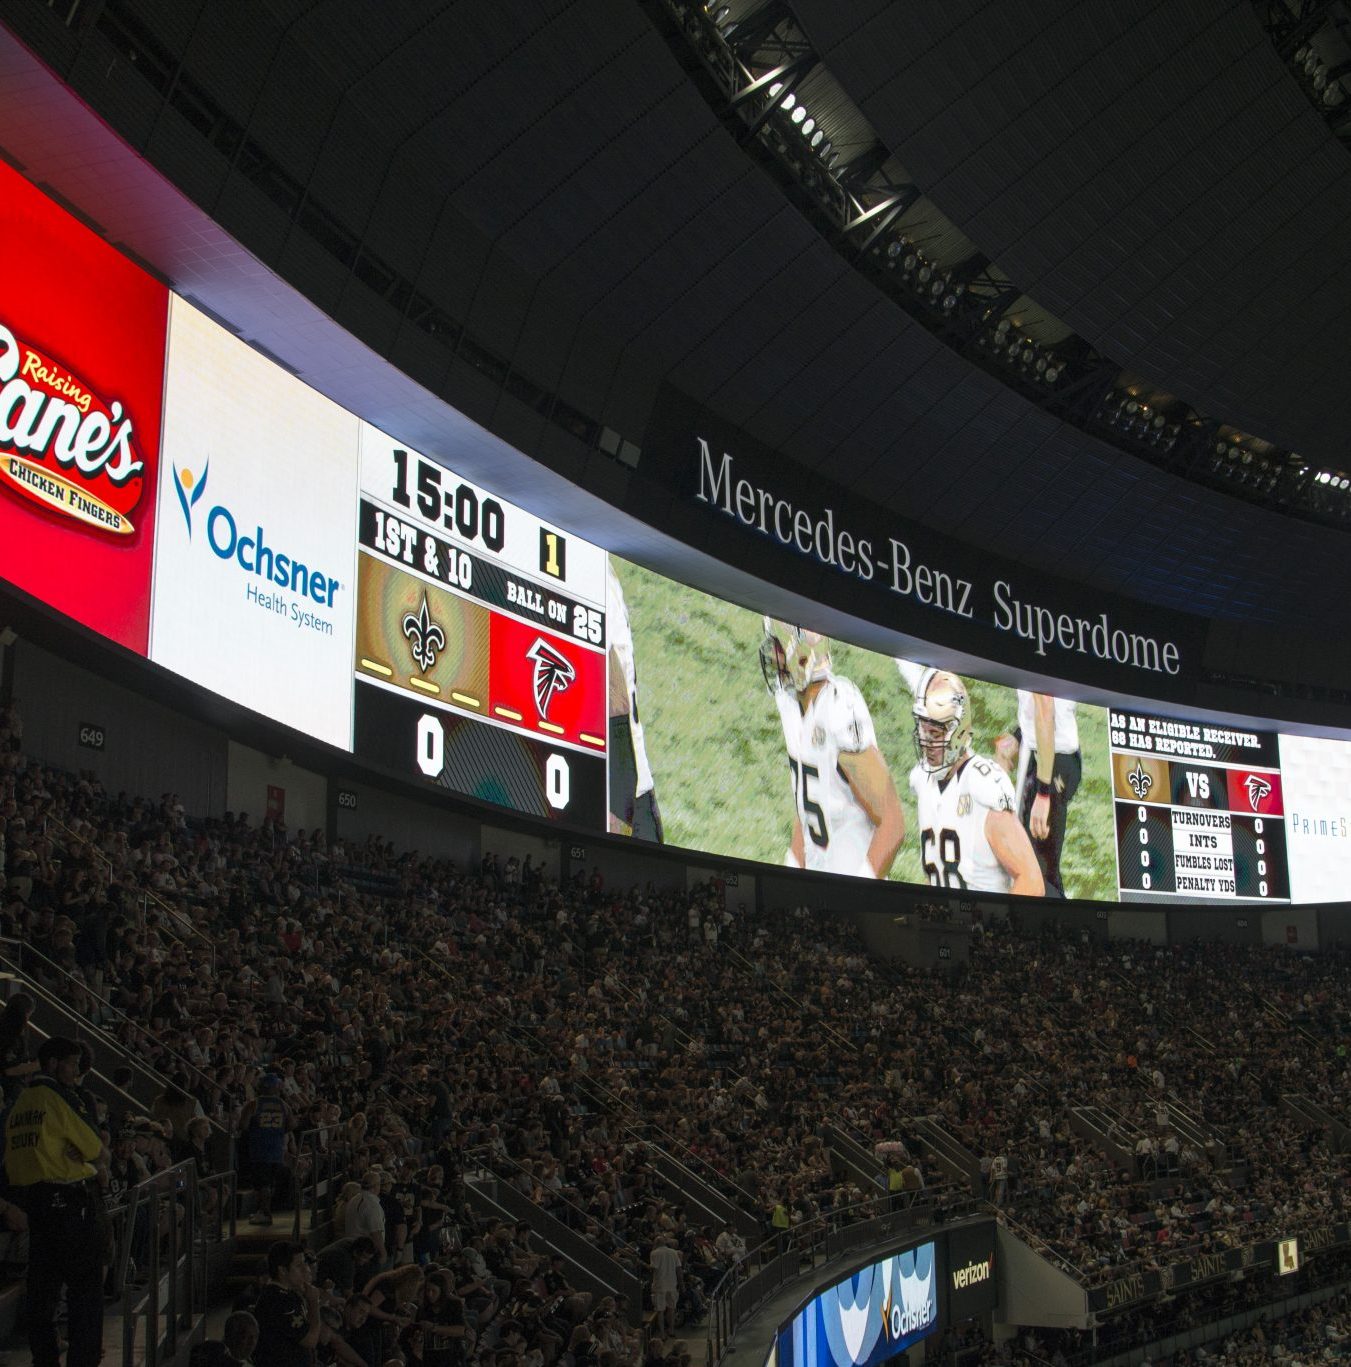 Image shows large digital screens wrapping around the inside of a sport stadium tier